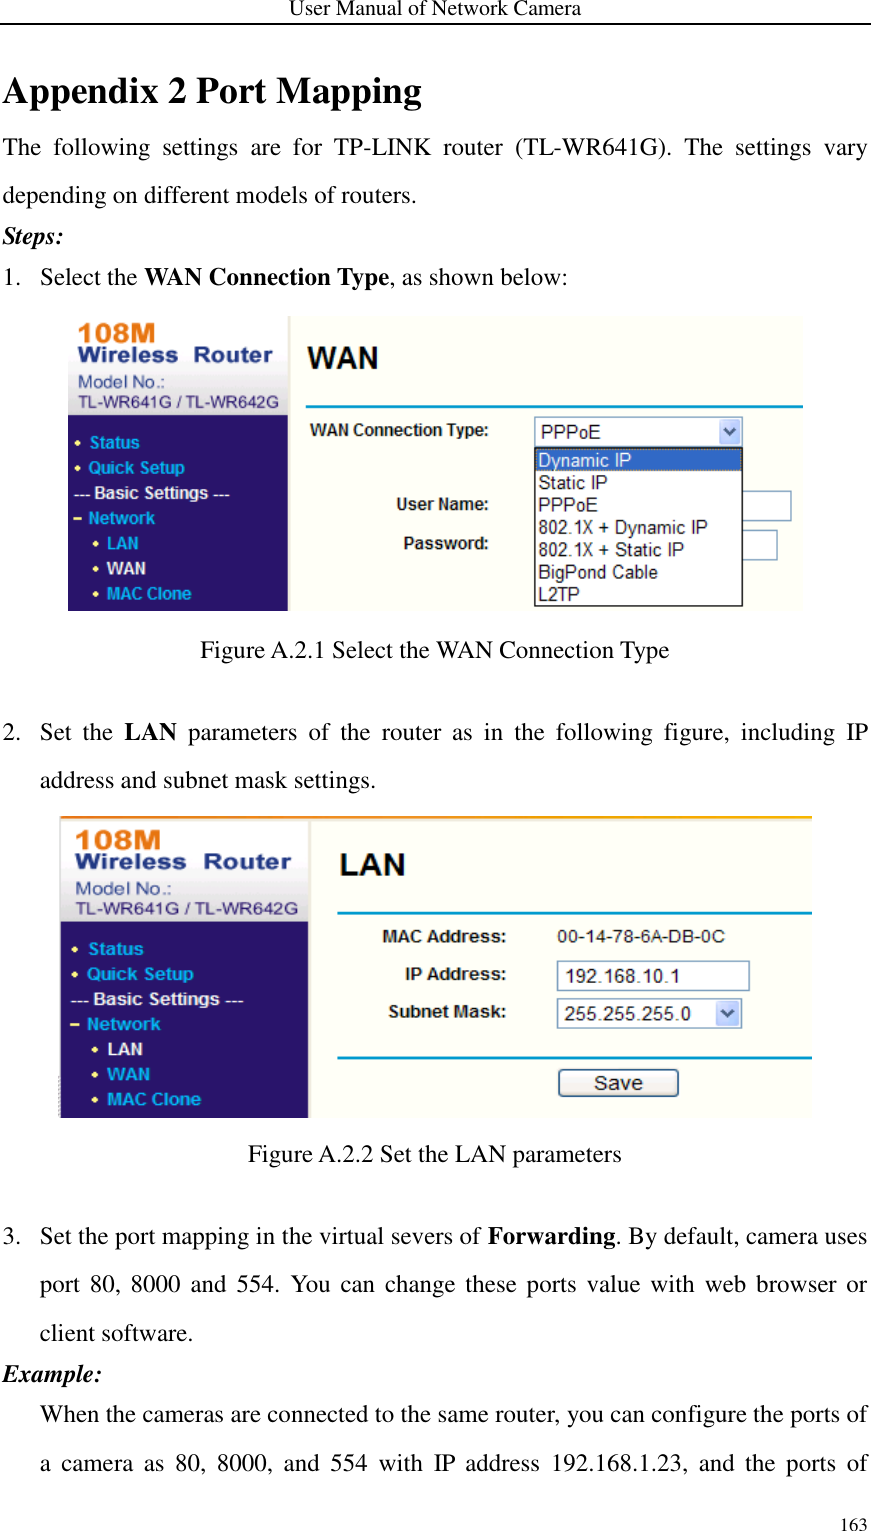 User Manual of Network Camera 163  Appendix 2 Port Mapping The  following  settings  are  for  TP-LINK  router  (TL-WR641G).  The  settings  vary depending on different models of routers. Steps: 1. Select the WAN Connection Type, as shown below:  Figure A.2.1 Select the WAN Connection Type  2. Set  the  LAN  parameters  of  the  router  as  in  the  following  figure,  including  IP address and subnet mask settings.  Figure A.2.2 Set the LAN parameters  3. Set the port mapping in the virtual severs of Forwarding. By default, camera uses port 80,  8000  and  554.  You can change  these ports value with  web  browser or client software. Example:   When the cameras are connected to the same router, you can configure the ports of a  camera  as  80,  8000,  and  554  with  IP  address  192.168.1.23,  and  the  ports  of 